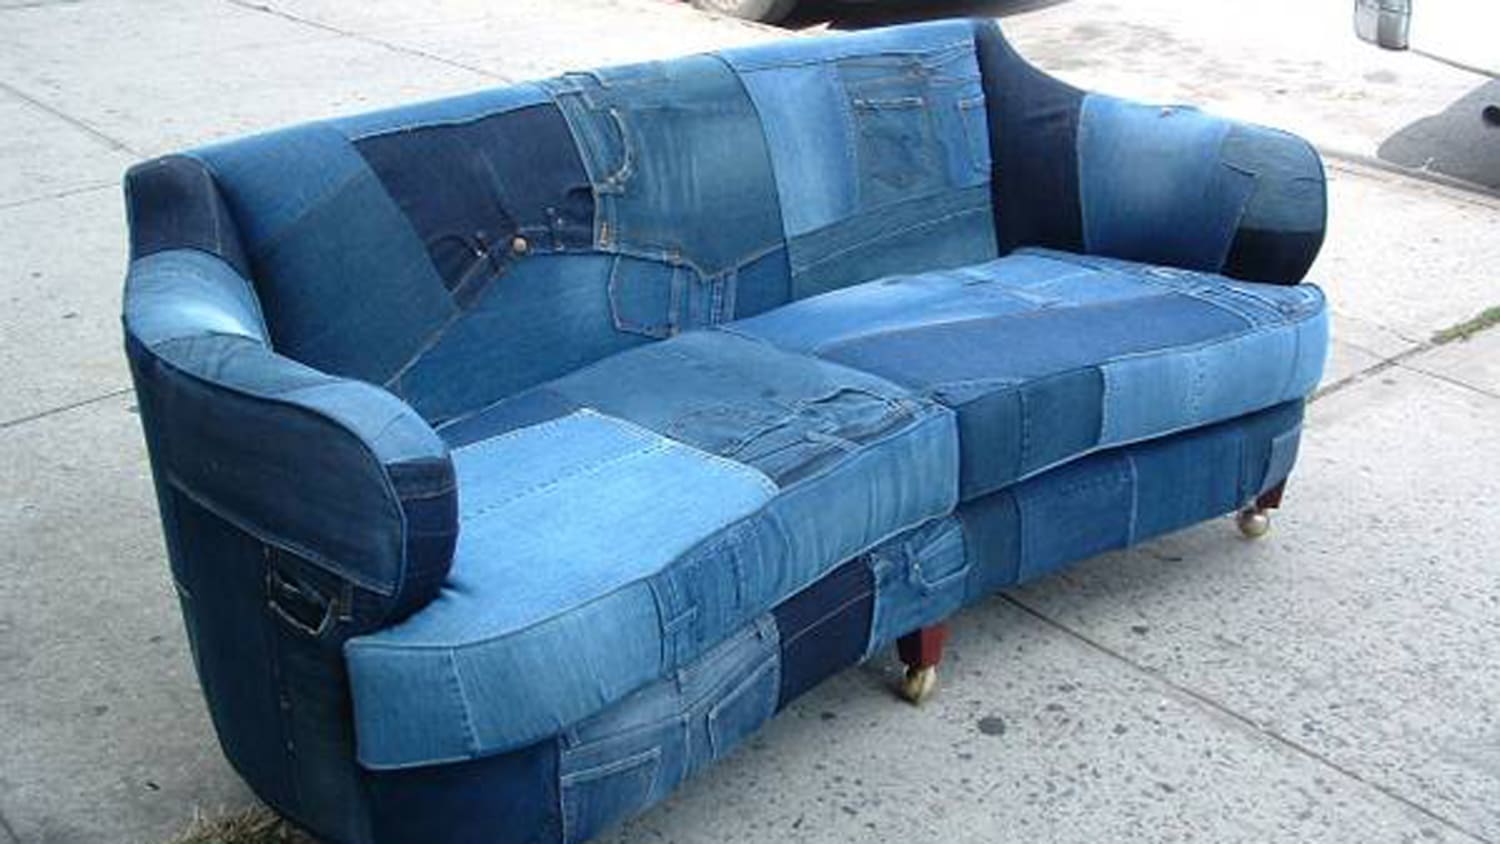 Craigslist Sofa Made From Jeans